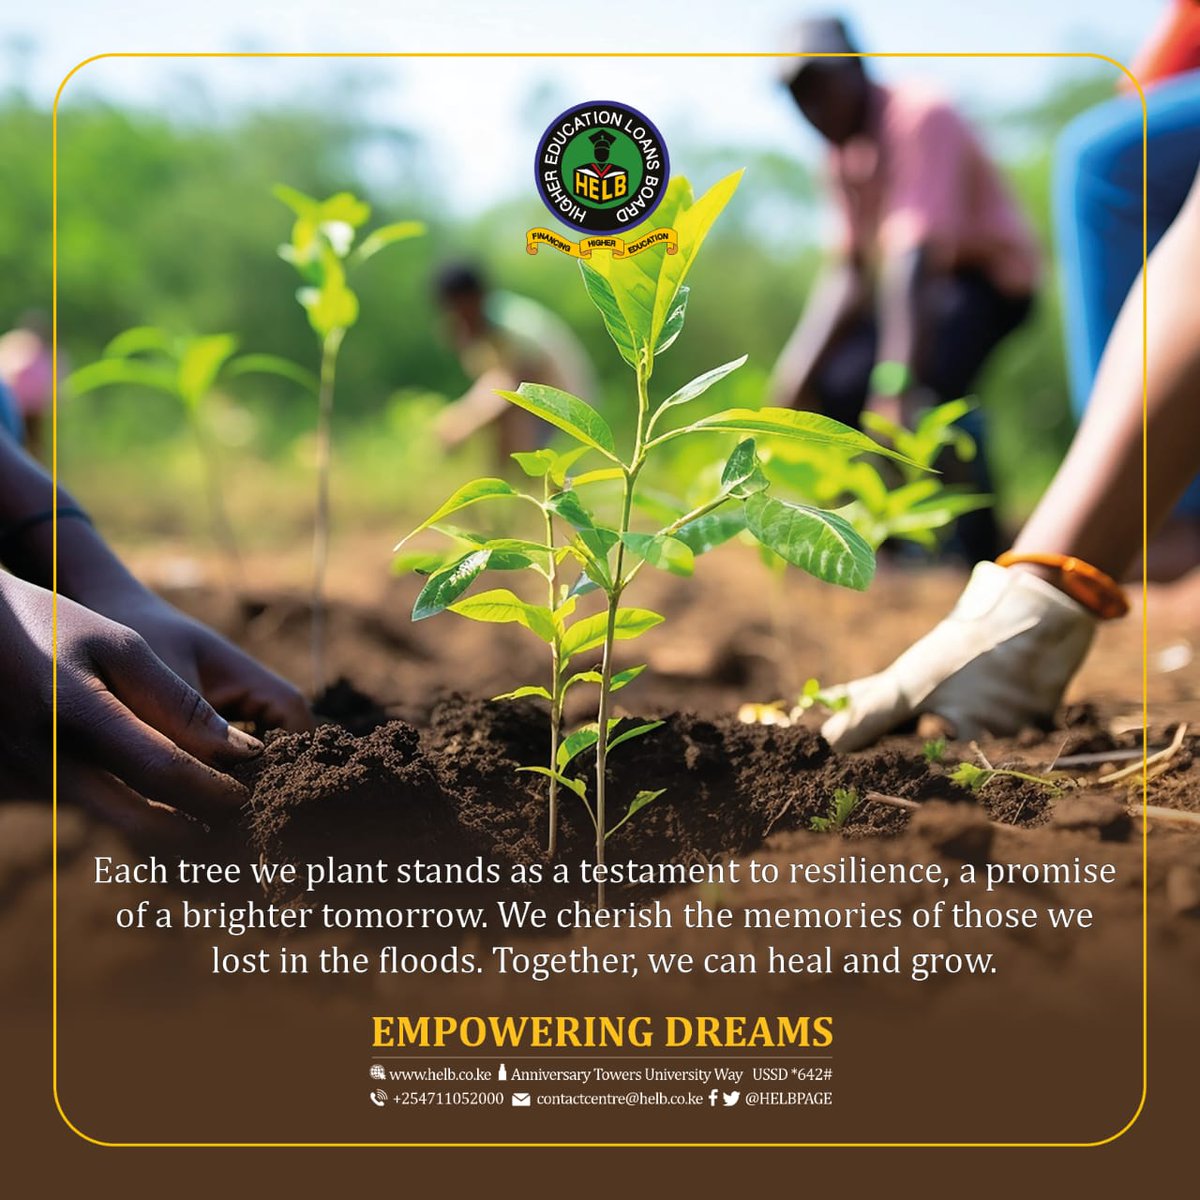 On this day, we recognize the importance of trees in anchoring our environment. To honour the departed, let's nurture nature and foster a world where communities thrive, and disasters are mitigated.